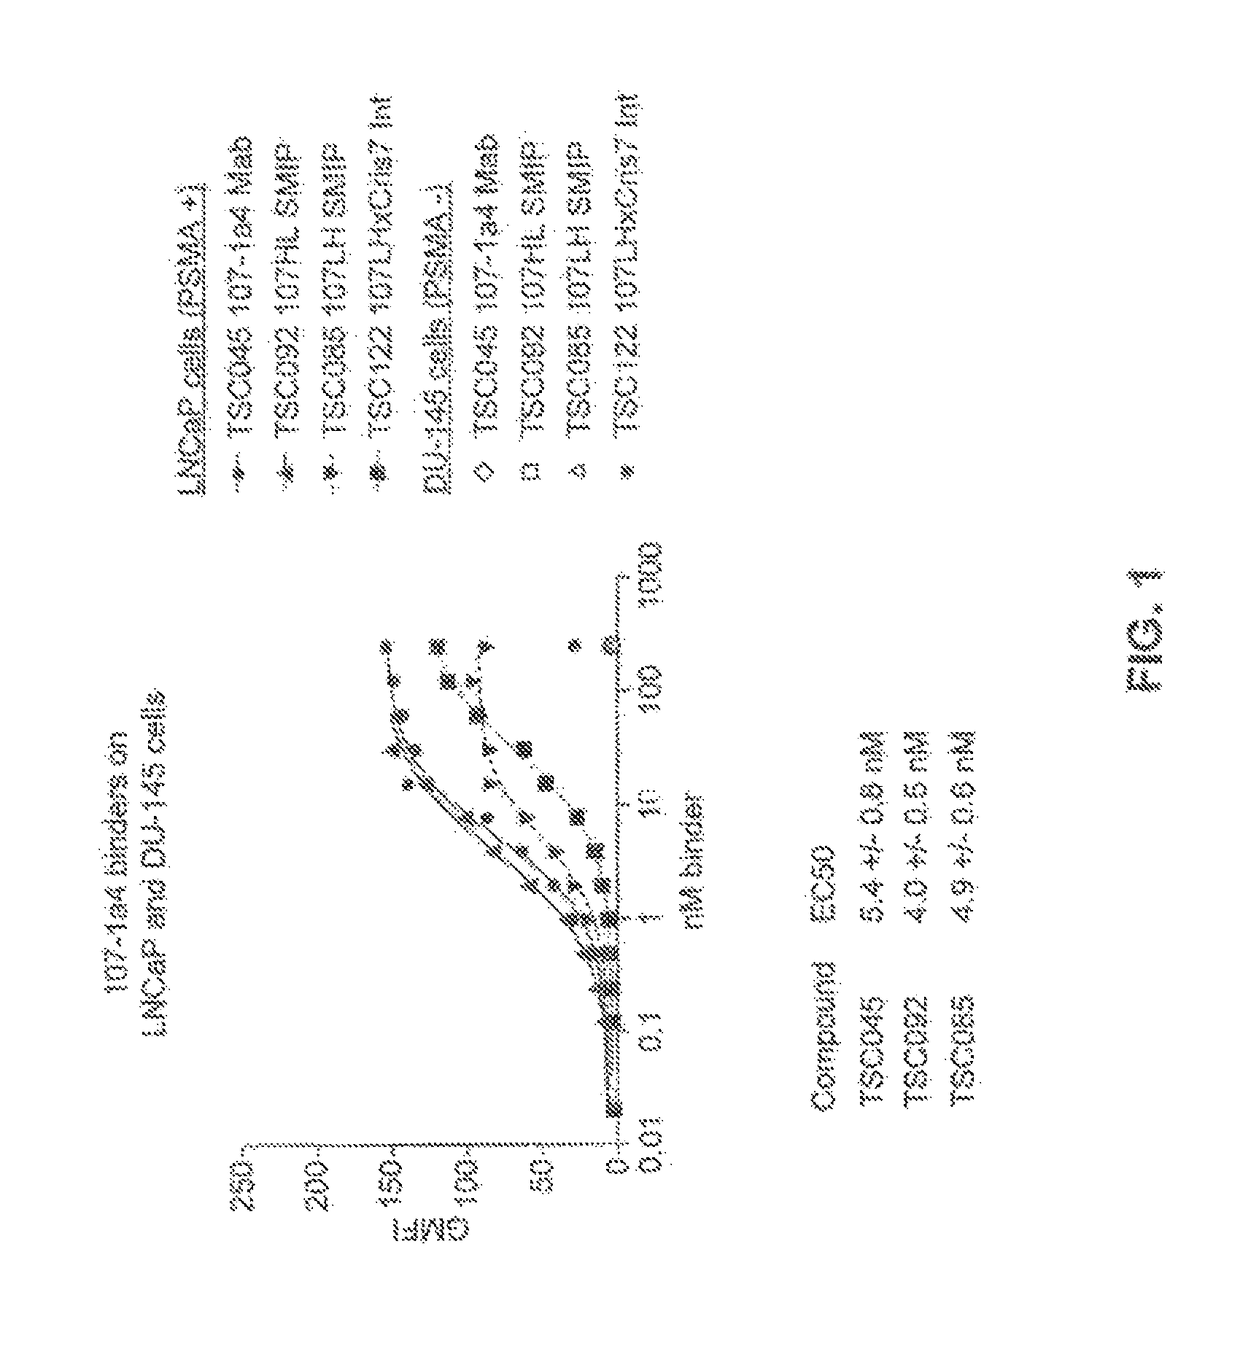 Prostate-specific membrane antigen binding proteins and related compositions and methods